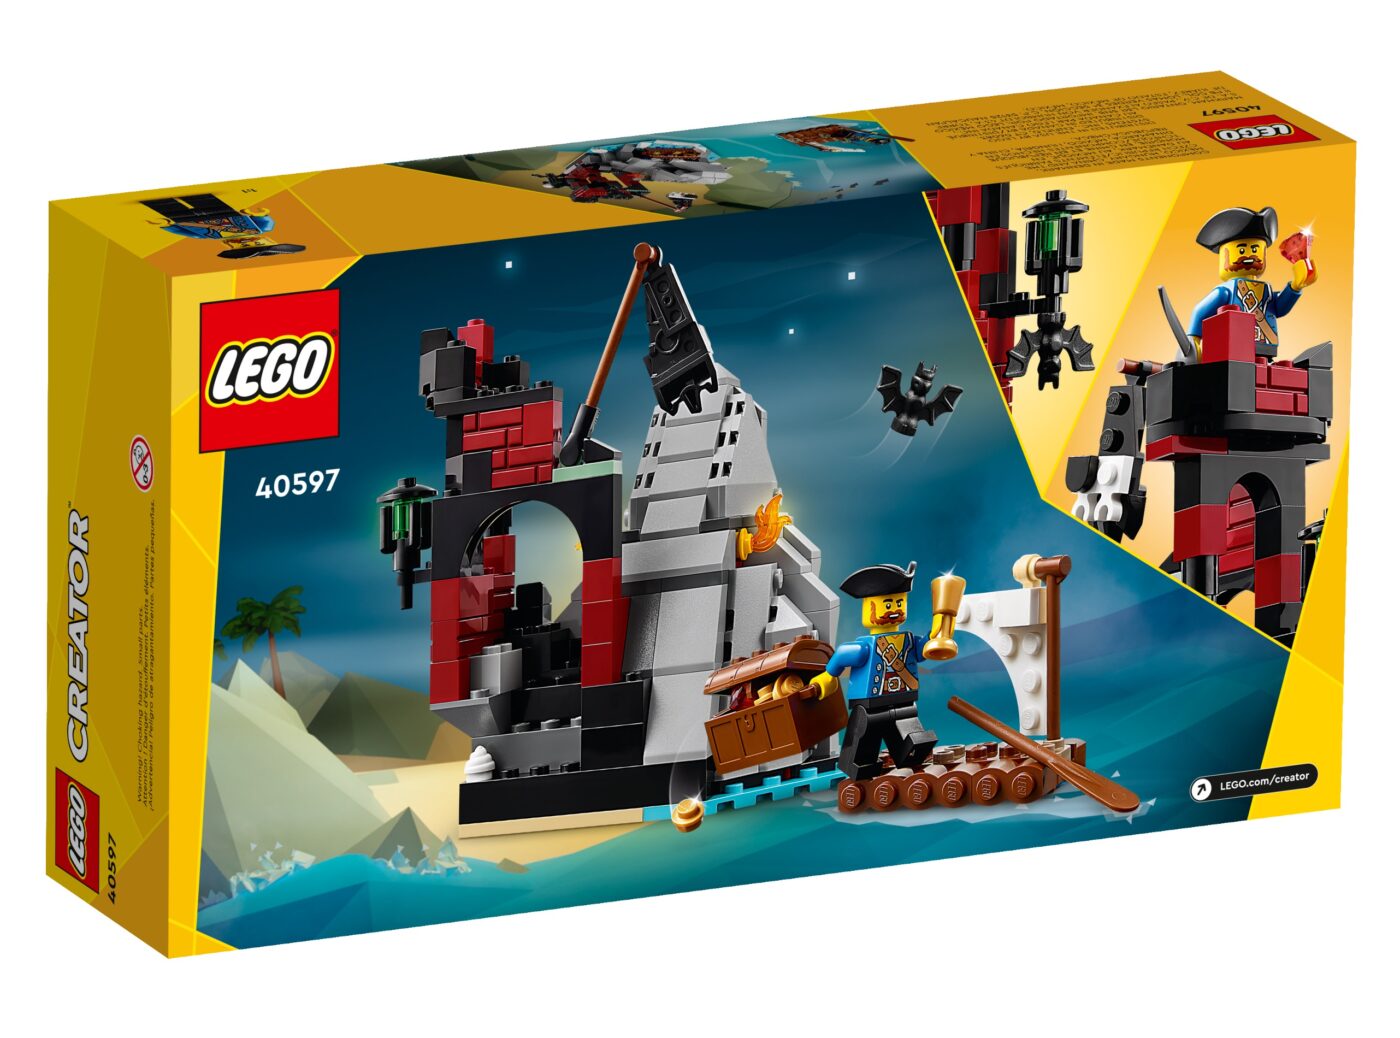 LEGO 40597 Scary Pirate Island GWP officially revealed - Jay's Brick Blog